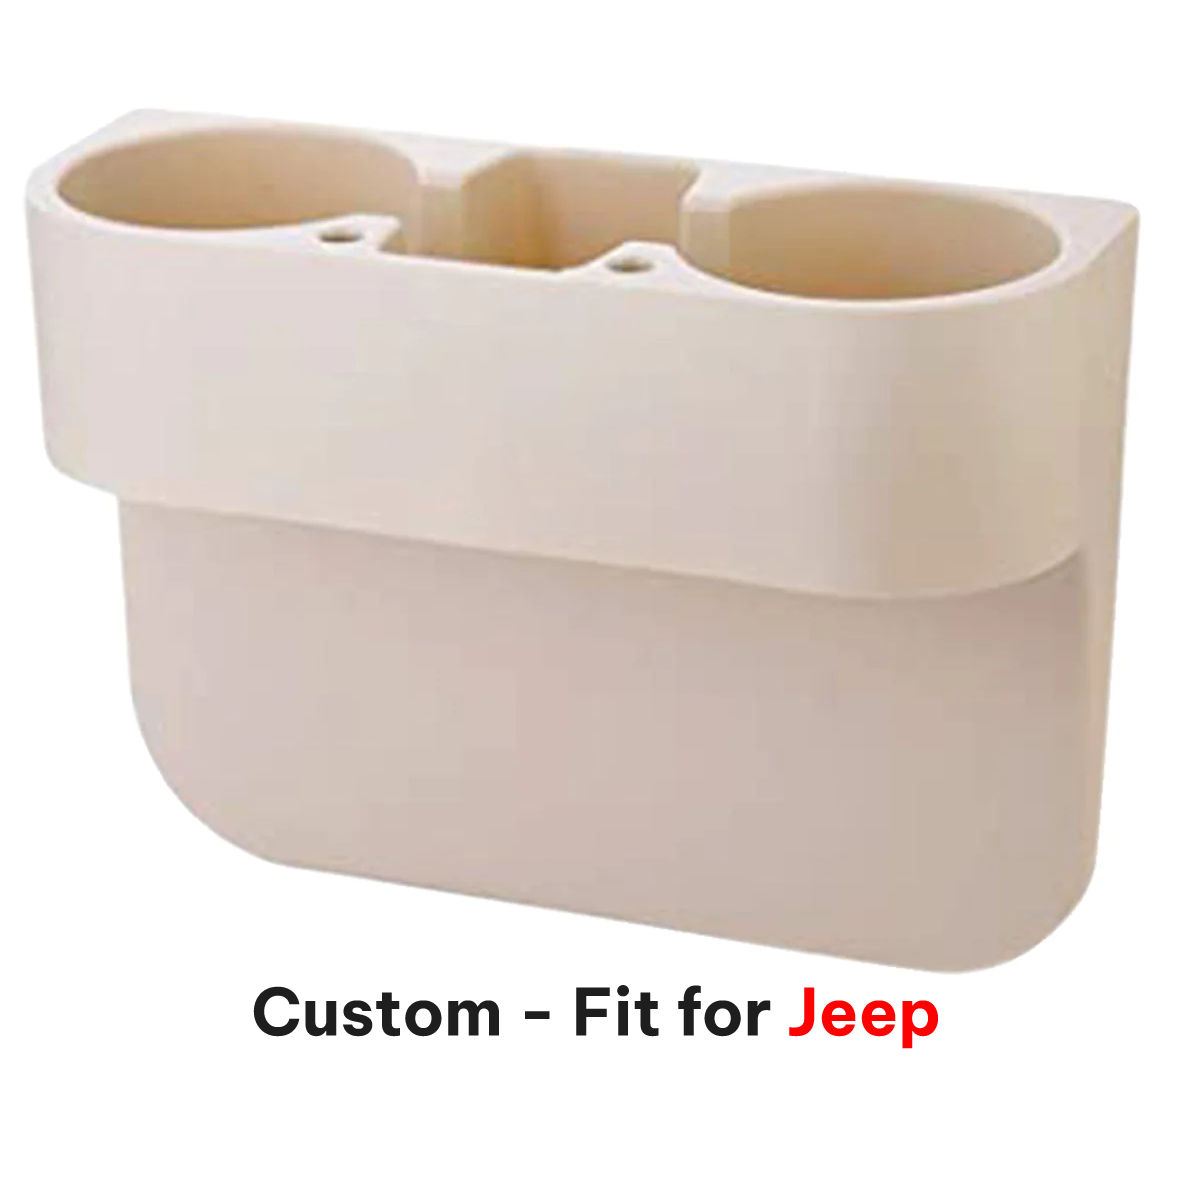 Cup Holder Portable Multifunction Vehicle Seat Cup Cell Phone Drinks Holder Box Car Interior Organizer, Custom For Your Cars, Car Accessories JE11995